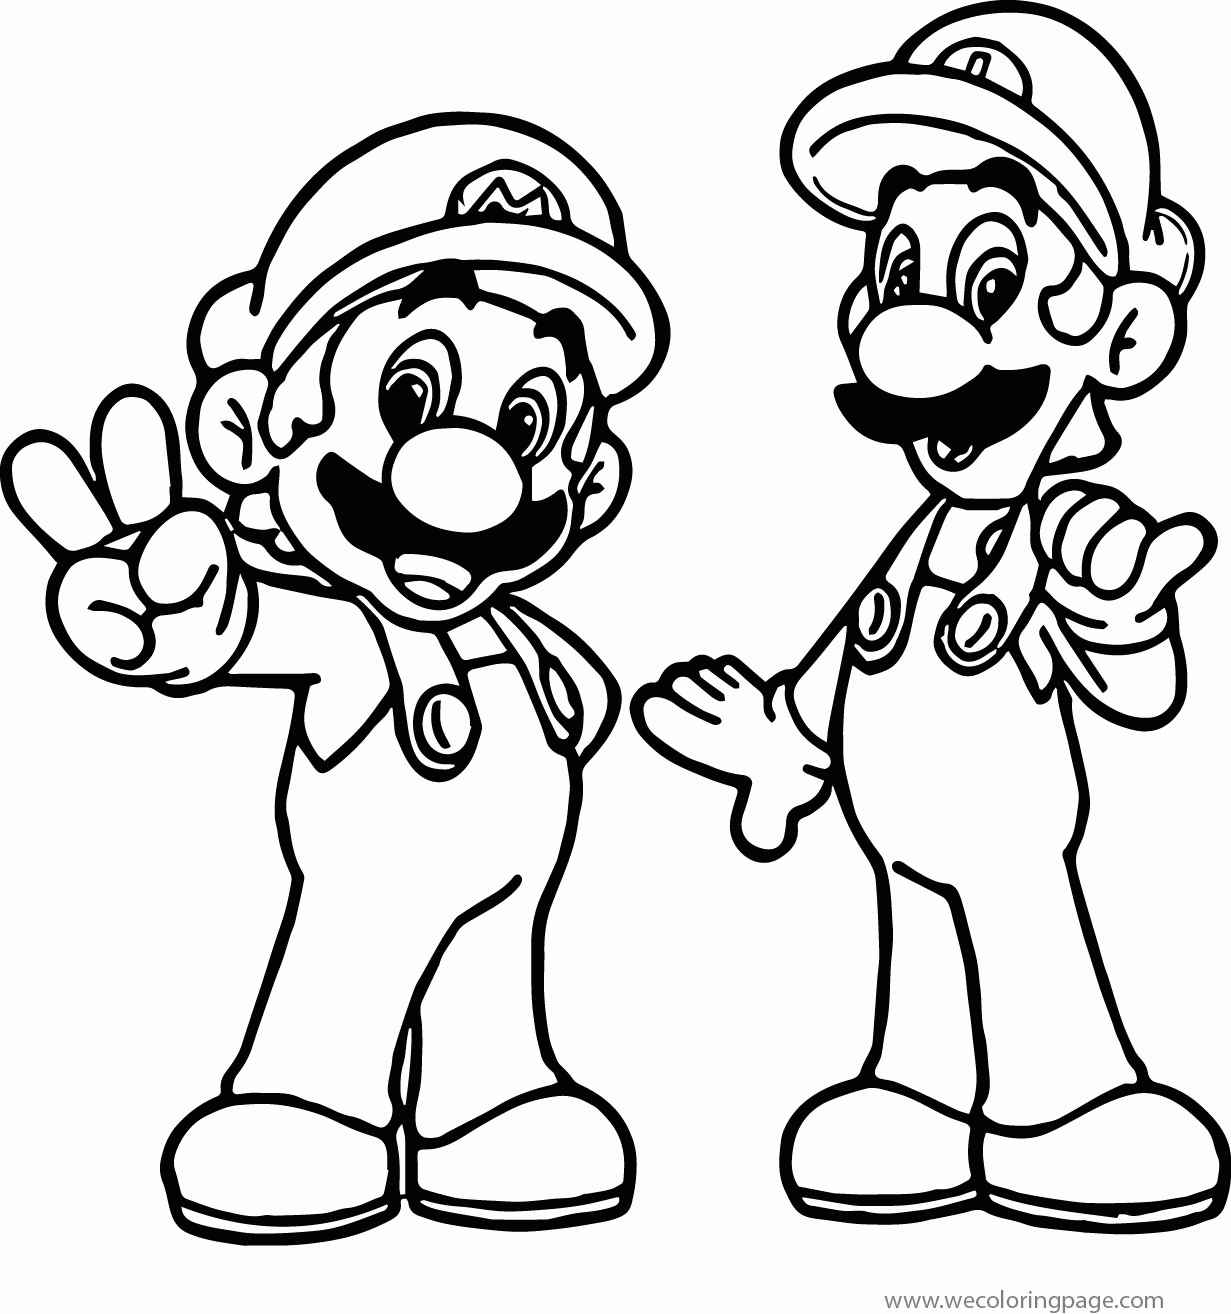 Toad From Super Mario Pages Coloring Pages